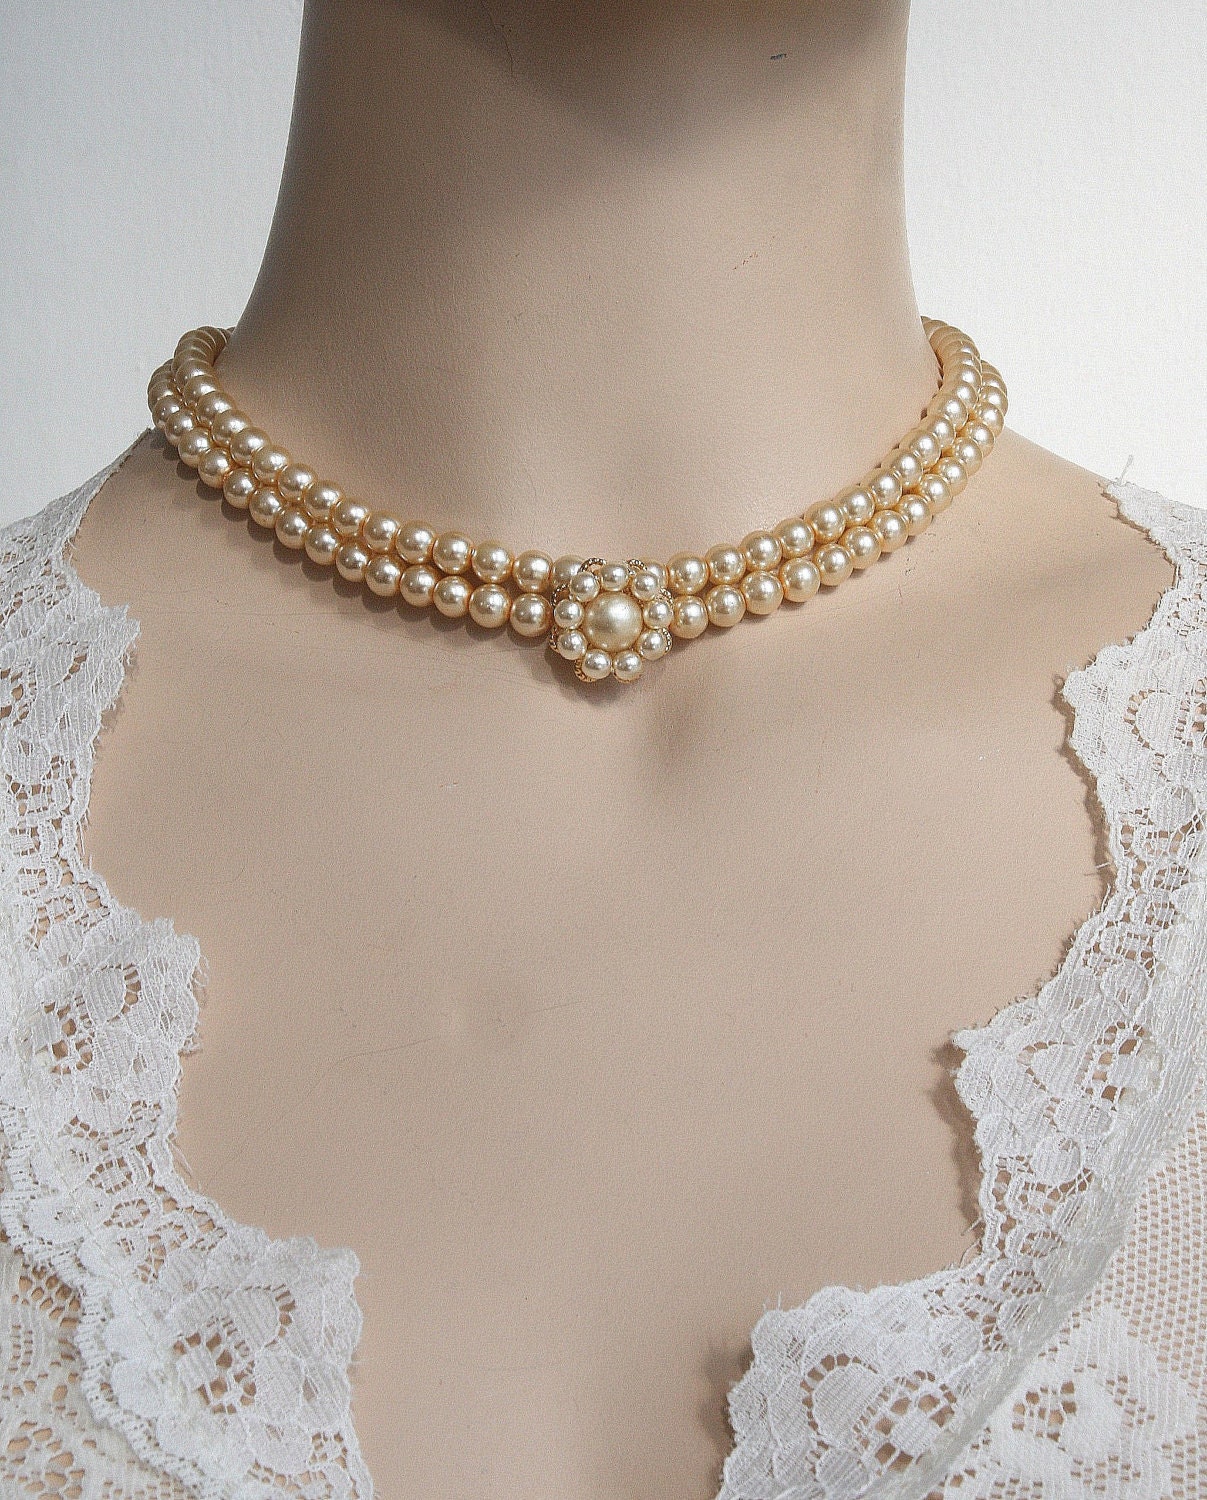 Bridal Pearl Necklace Pearls Silver Bride Choker Bride Necklace Multi  Strand Pearls Rhinestone Ivory Pearls Crystal Collar Necklace Weddings -  Etsy | Bridal pearl necklace, Bridal necklace, Bridesmaid jewelry sets